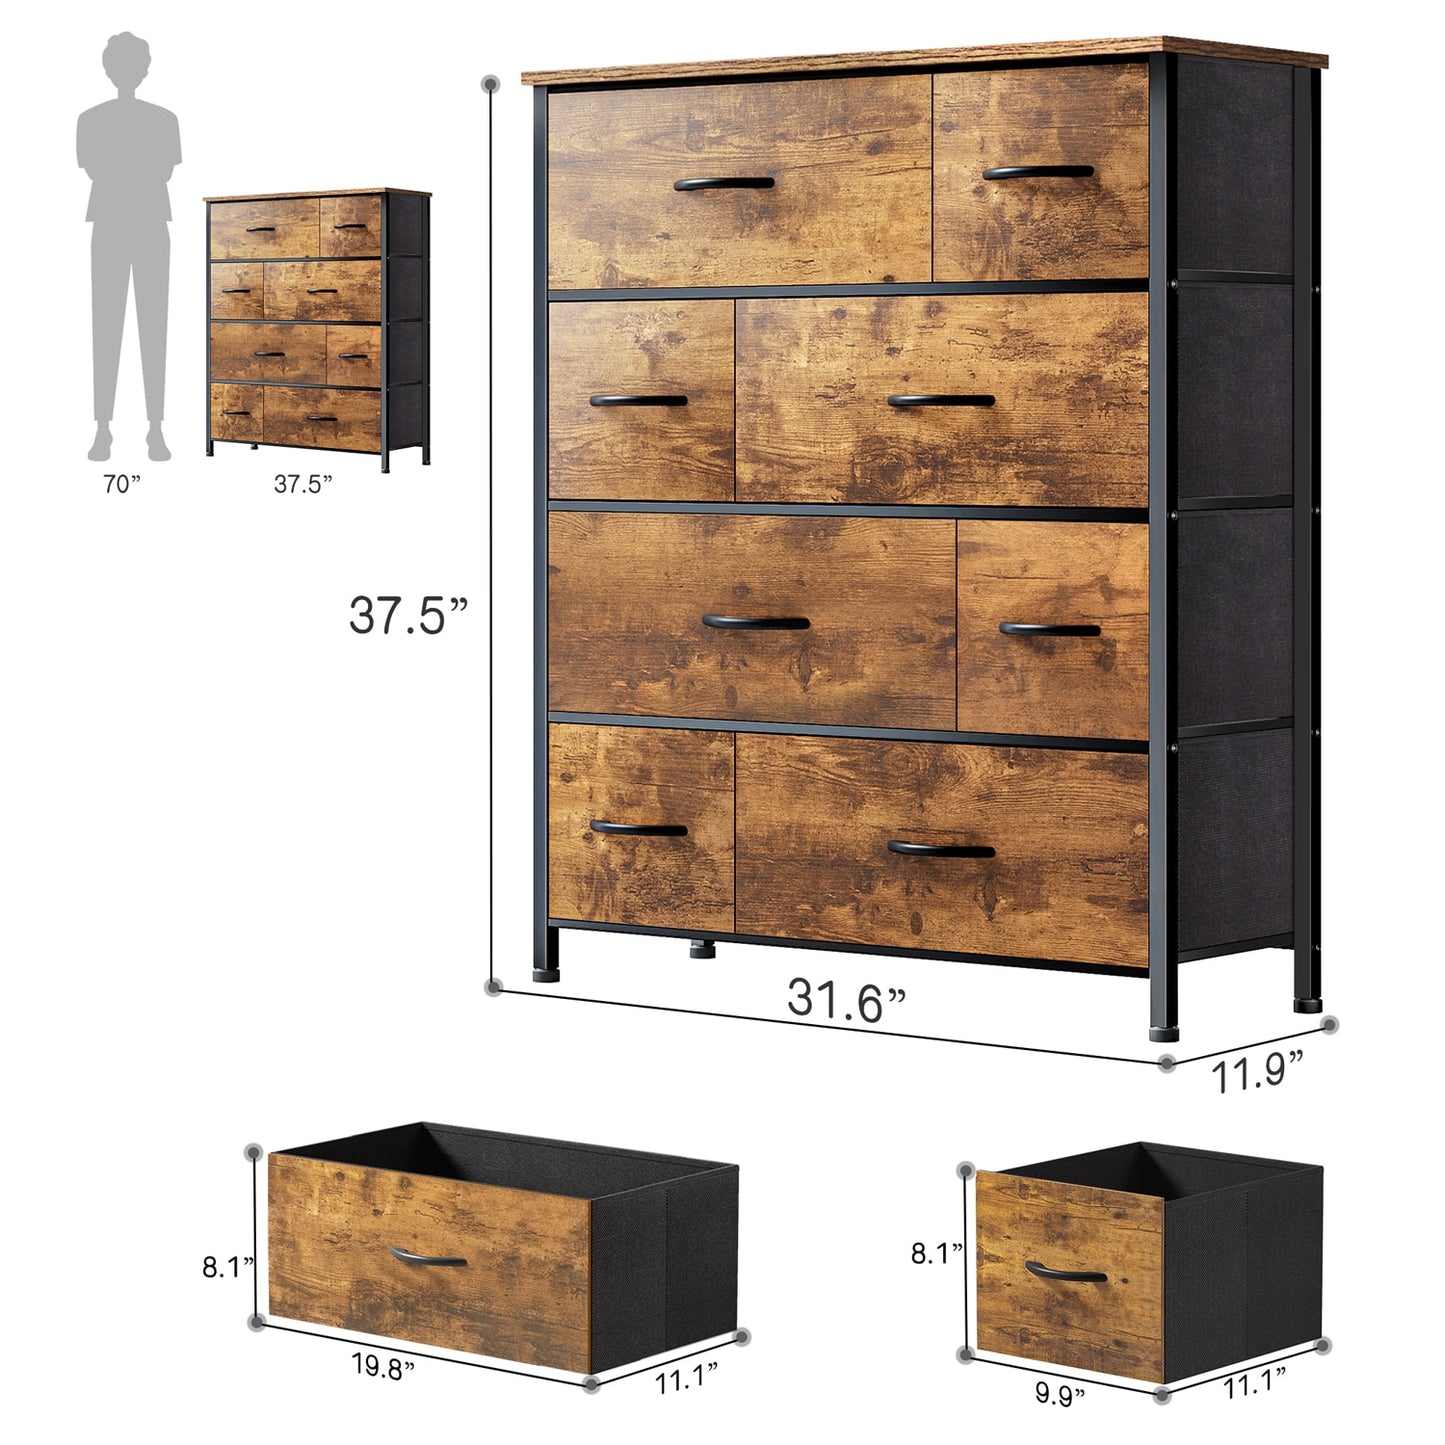 EnHomee 8 Drawer Dresser for Bedroom Fabric Dressers & Chest